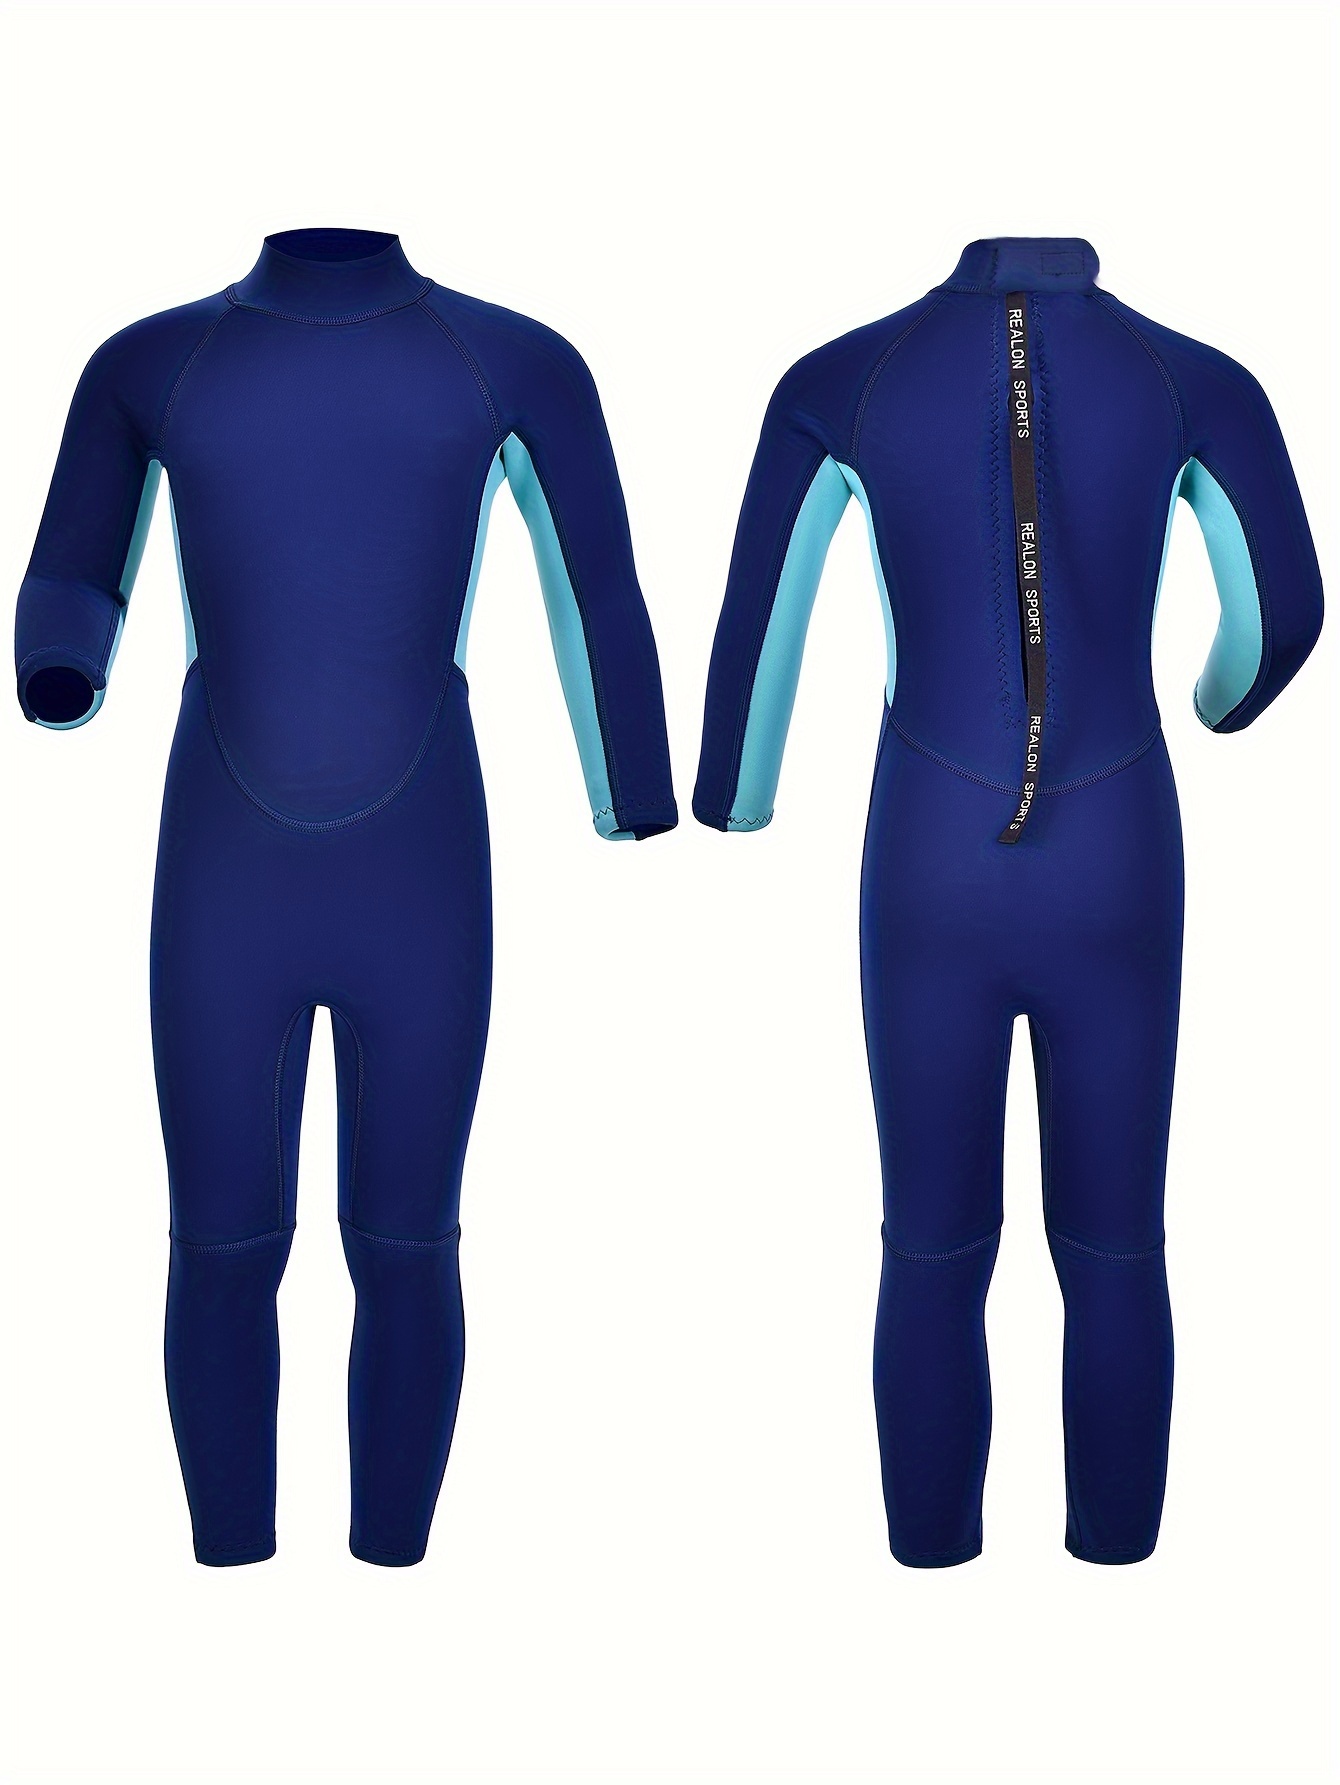  REALON Womens Wetsuits 2mm, Adult One Piece Full Body Long  Sleeves Neoprene Wet Suits 1.5mm Thermal Swimsuit for Surfing Diving  Snorkeling Swimming : Sports & Outdoors